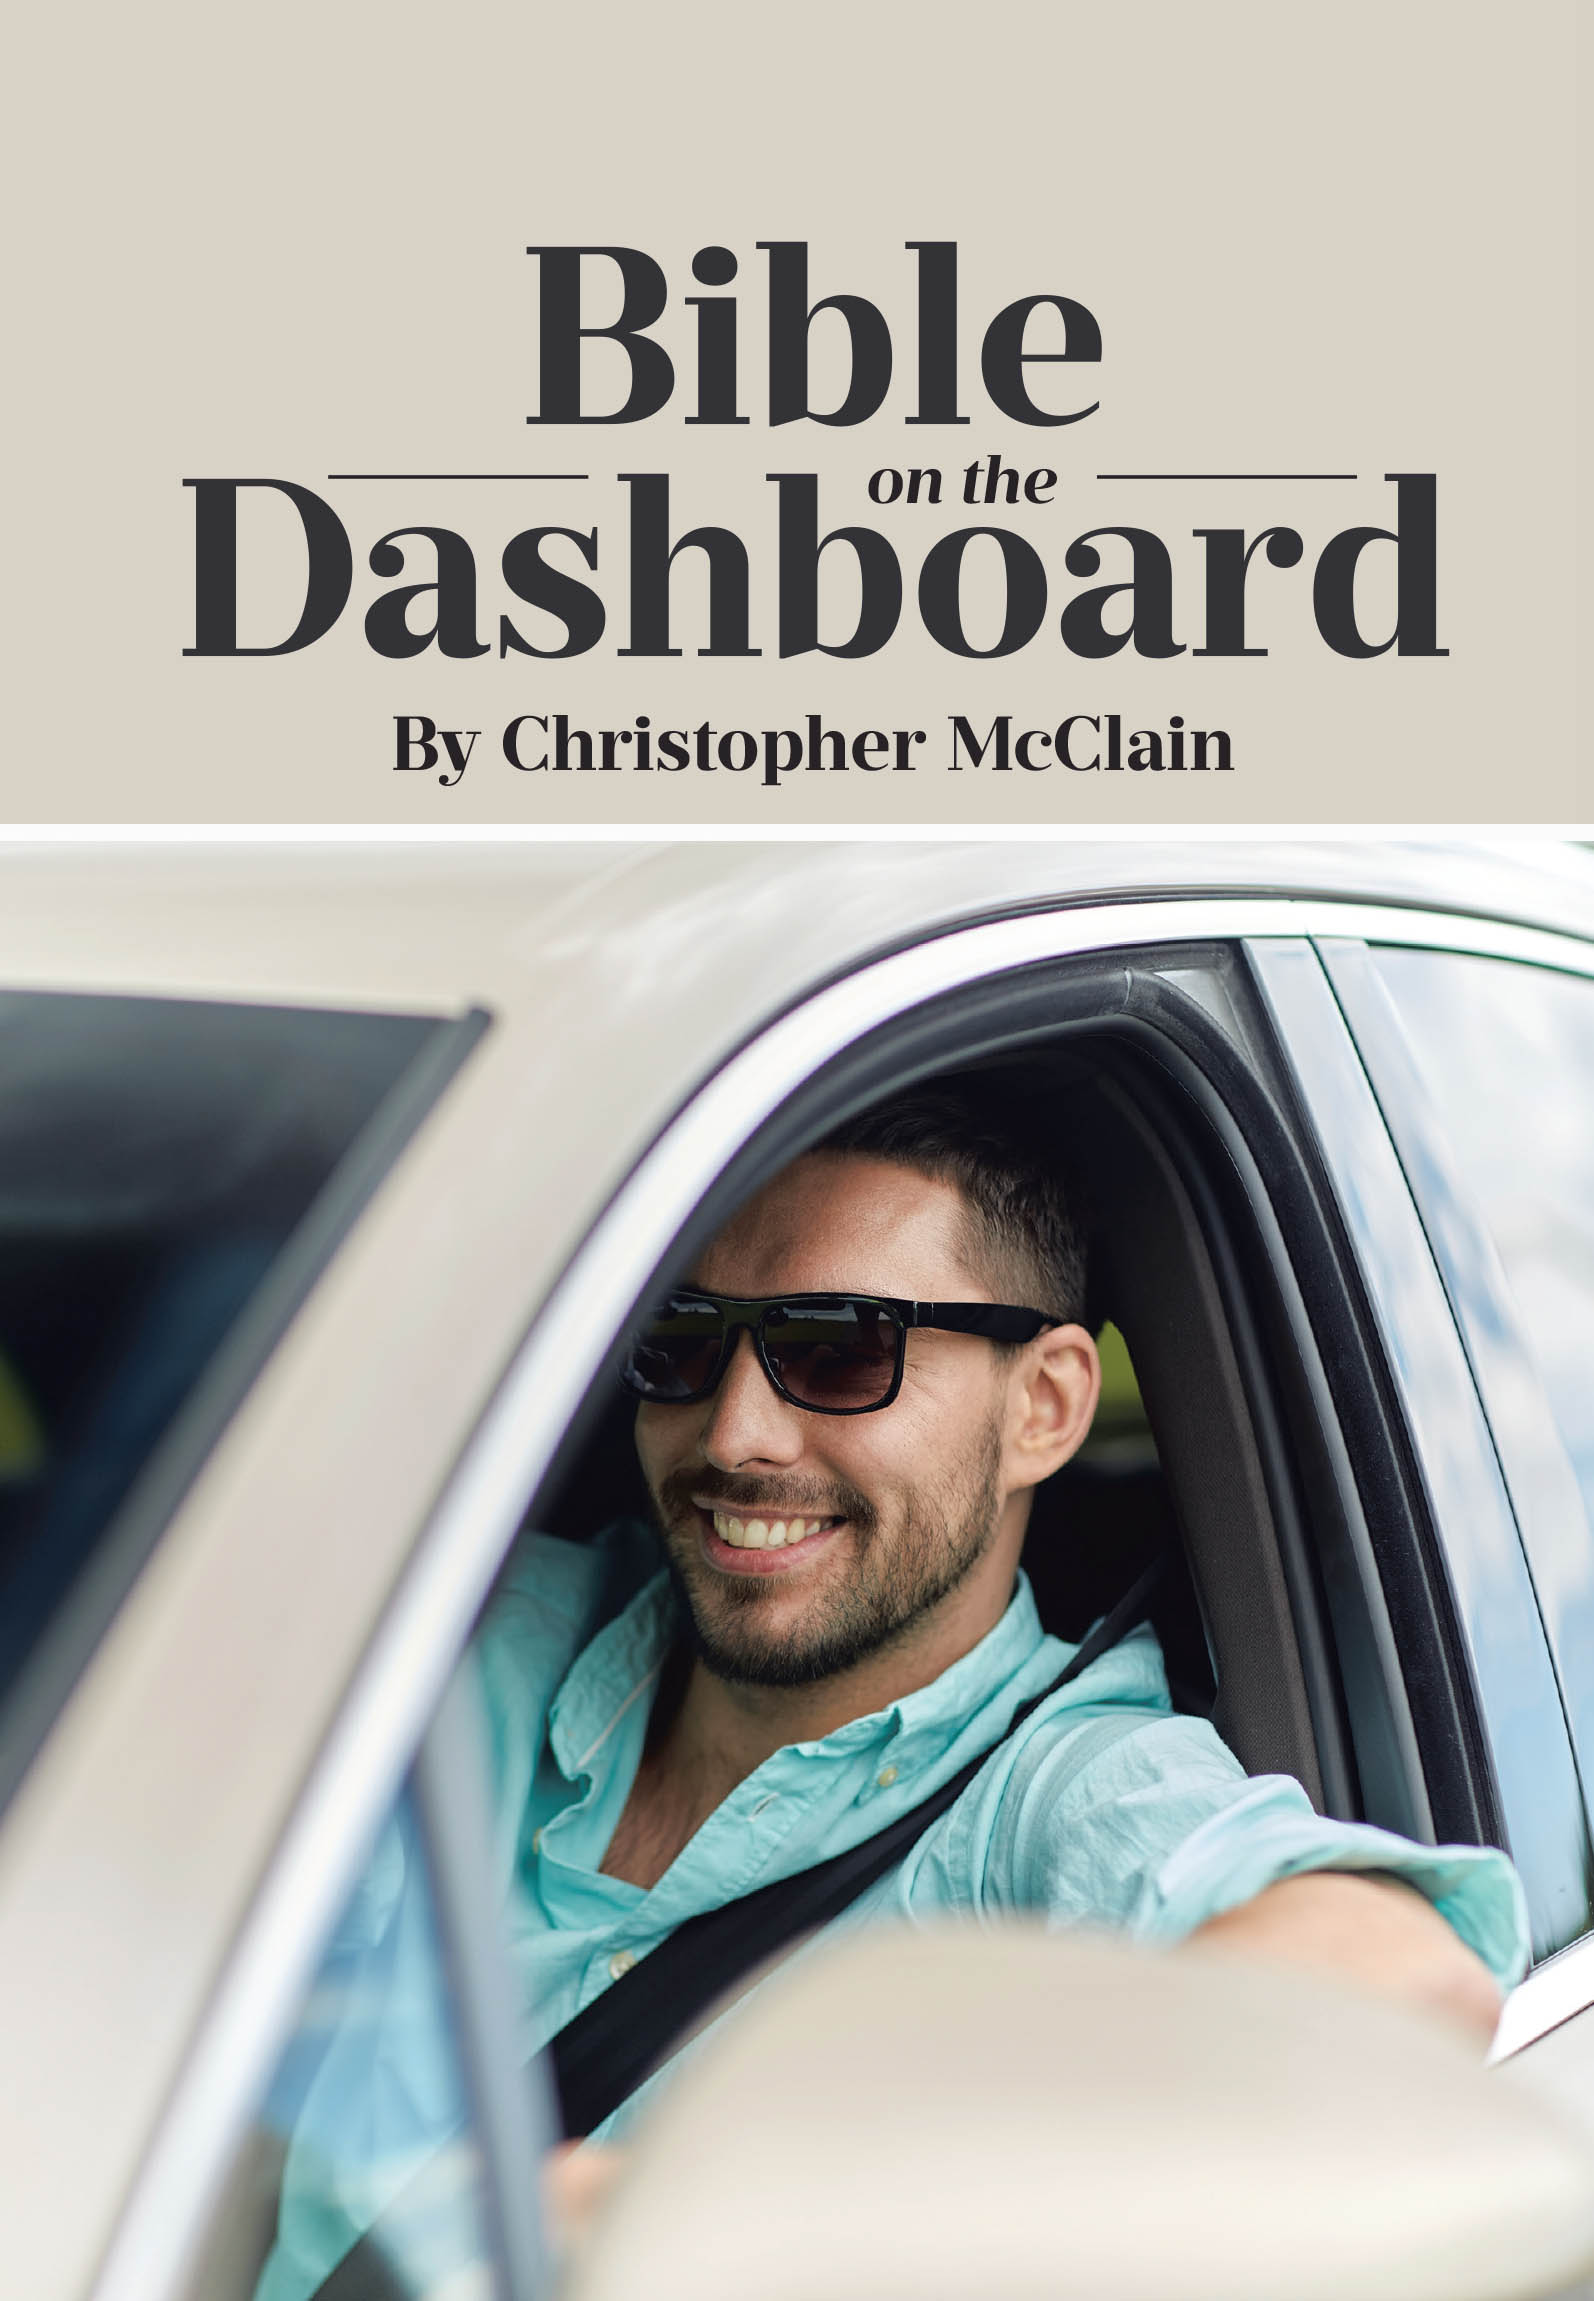 Author Christopher McClain’s New Book, "Bible on the Dashboard," Follows One Man’s Journey of Redemption, Resilience, and the Transformative Power of Love